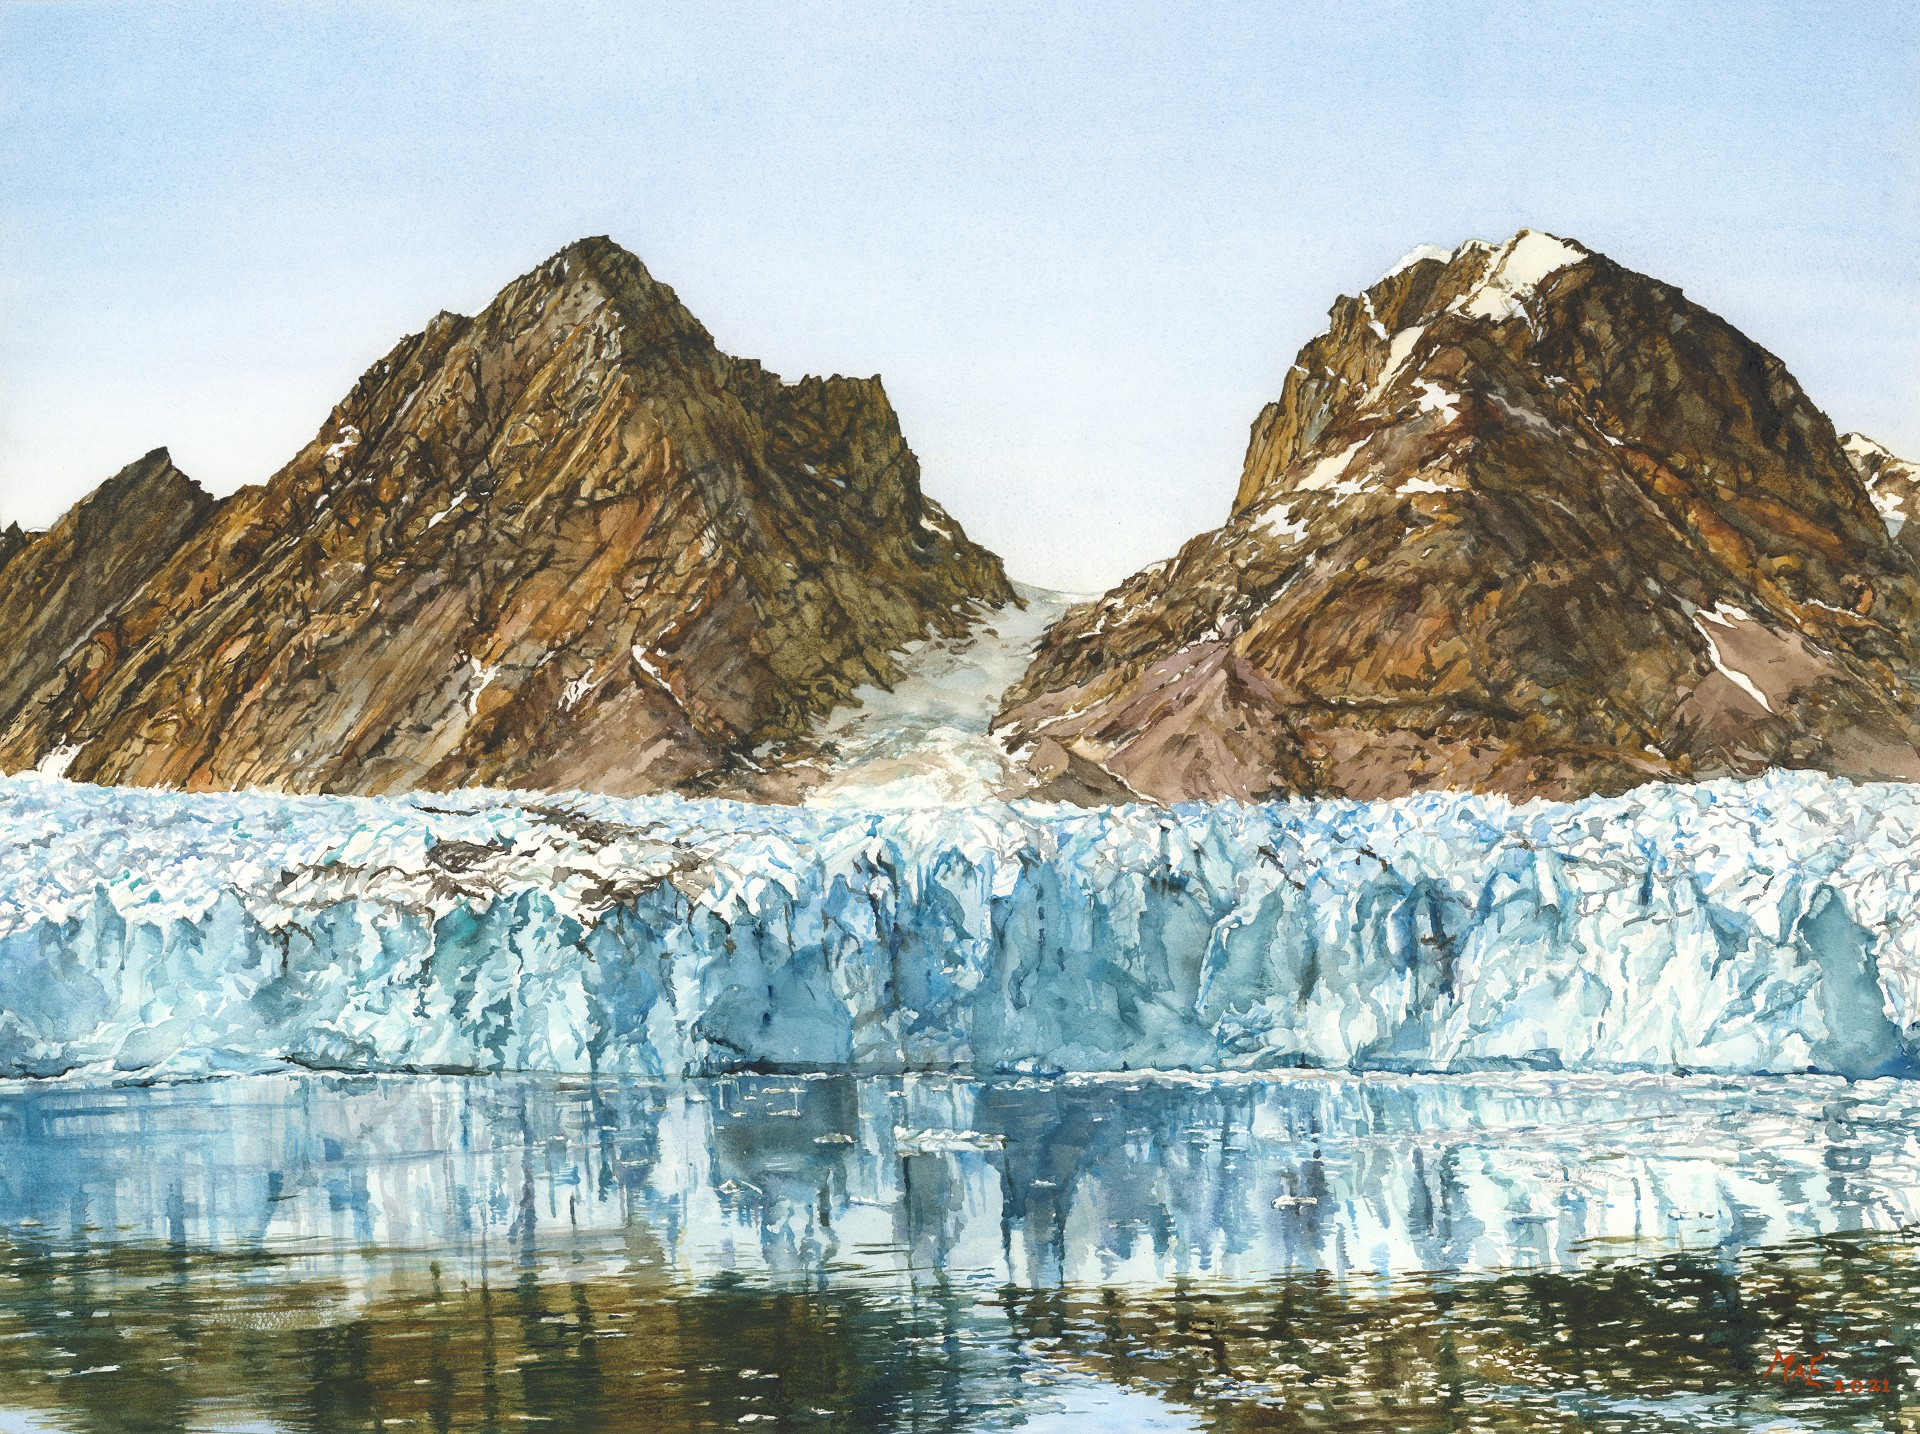 The magnificent 50 metre high Thrym Glacier, Skjoldungen Fjord in South East Greenland 2021 58 x 76cm Watercolour